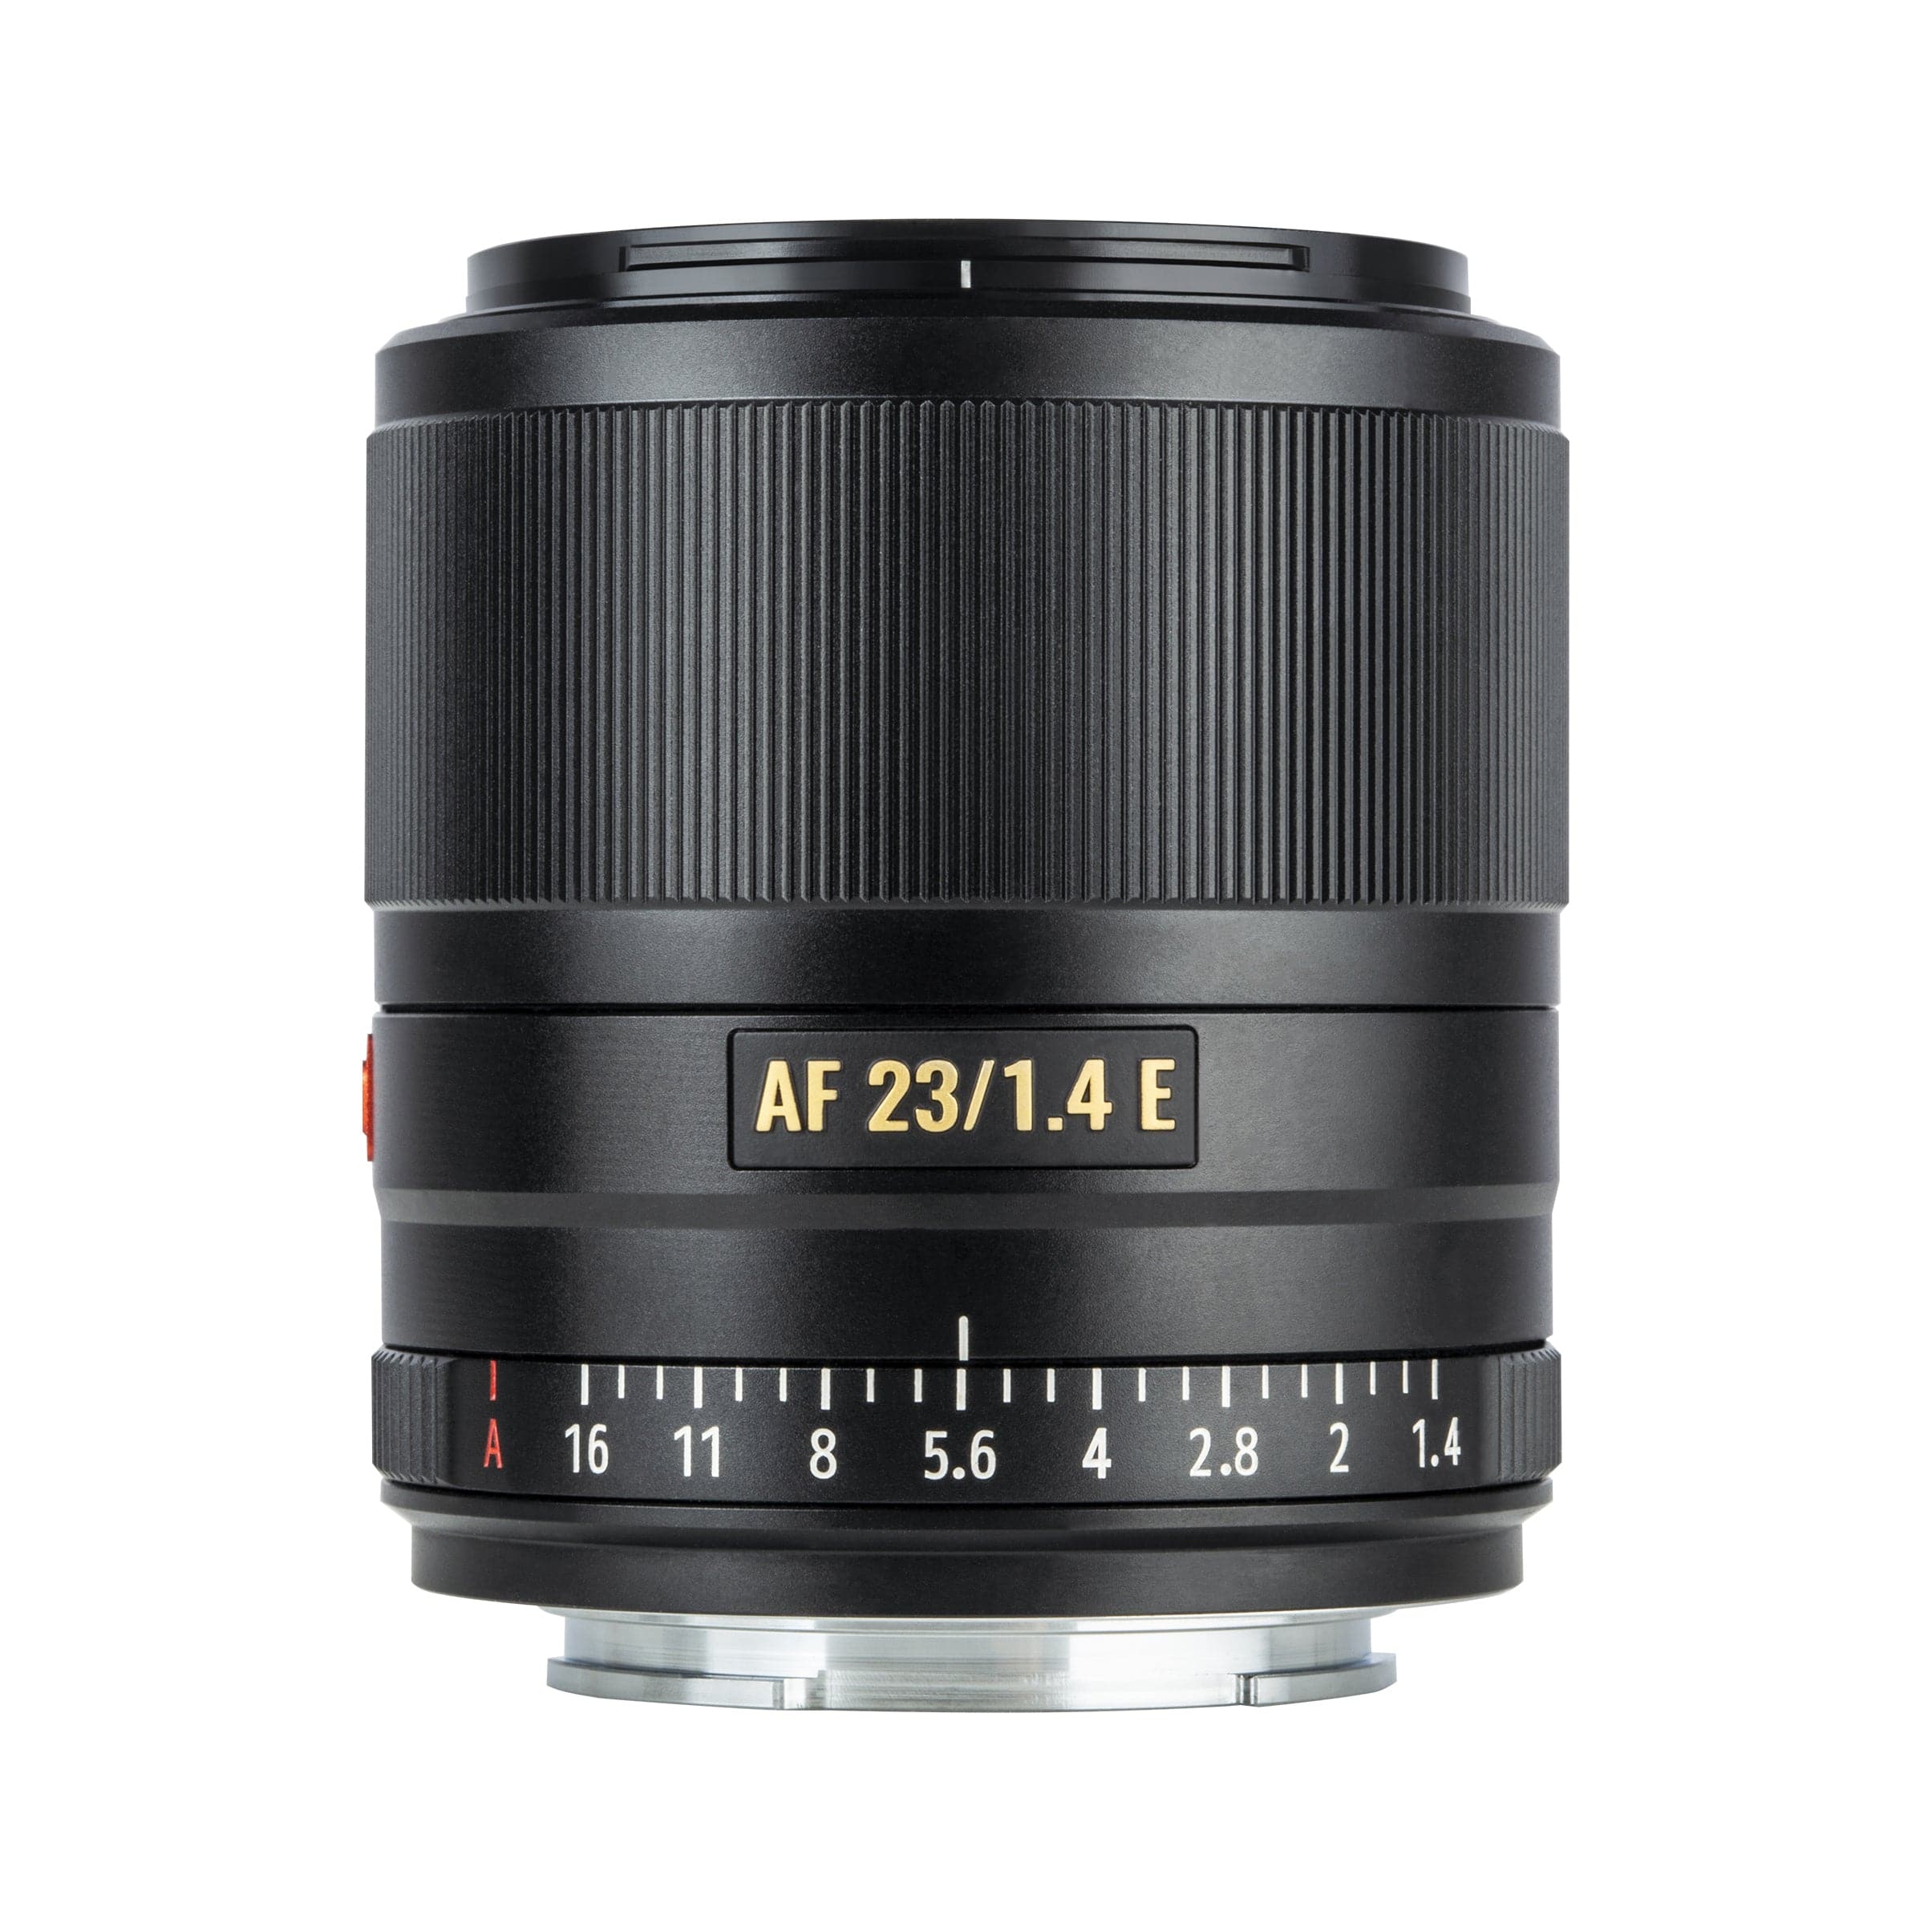 NEW Viltrox 23mm f1.4 E Auto Focus APS-C Prime Lens for Sony E-mount Camera  with Large Aperture